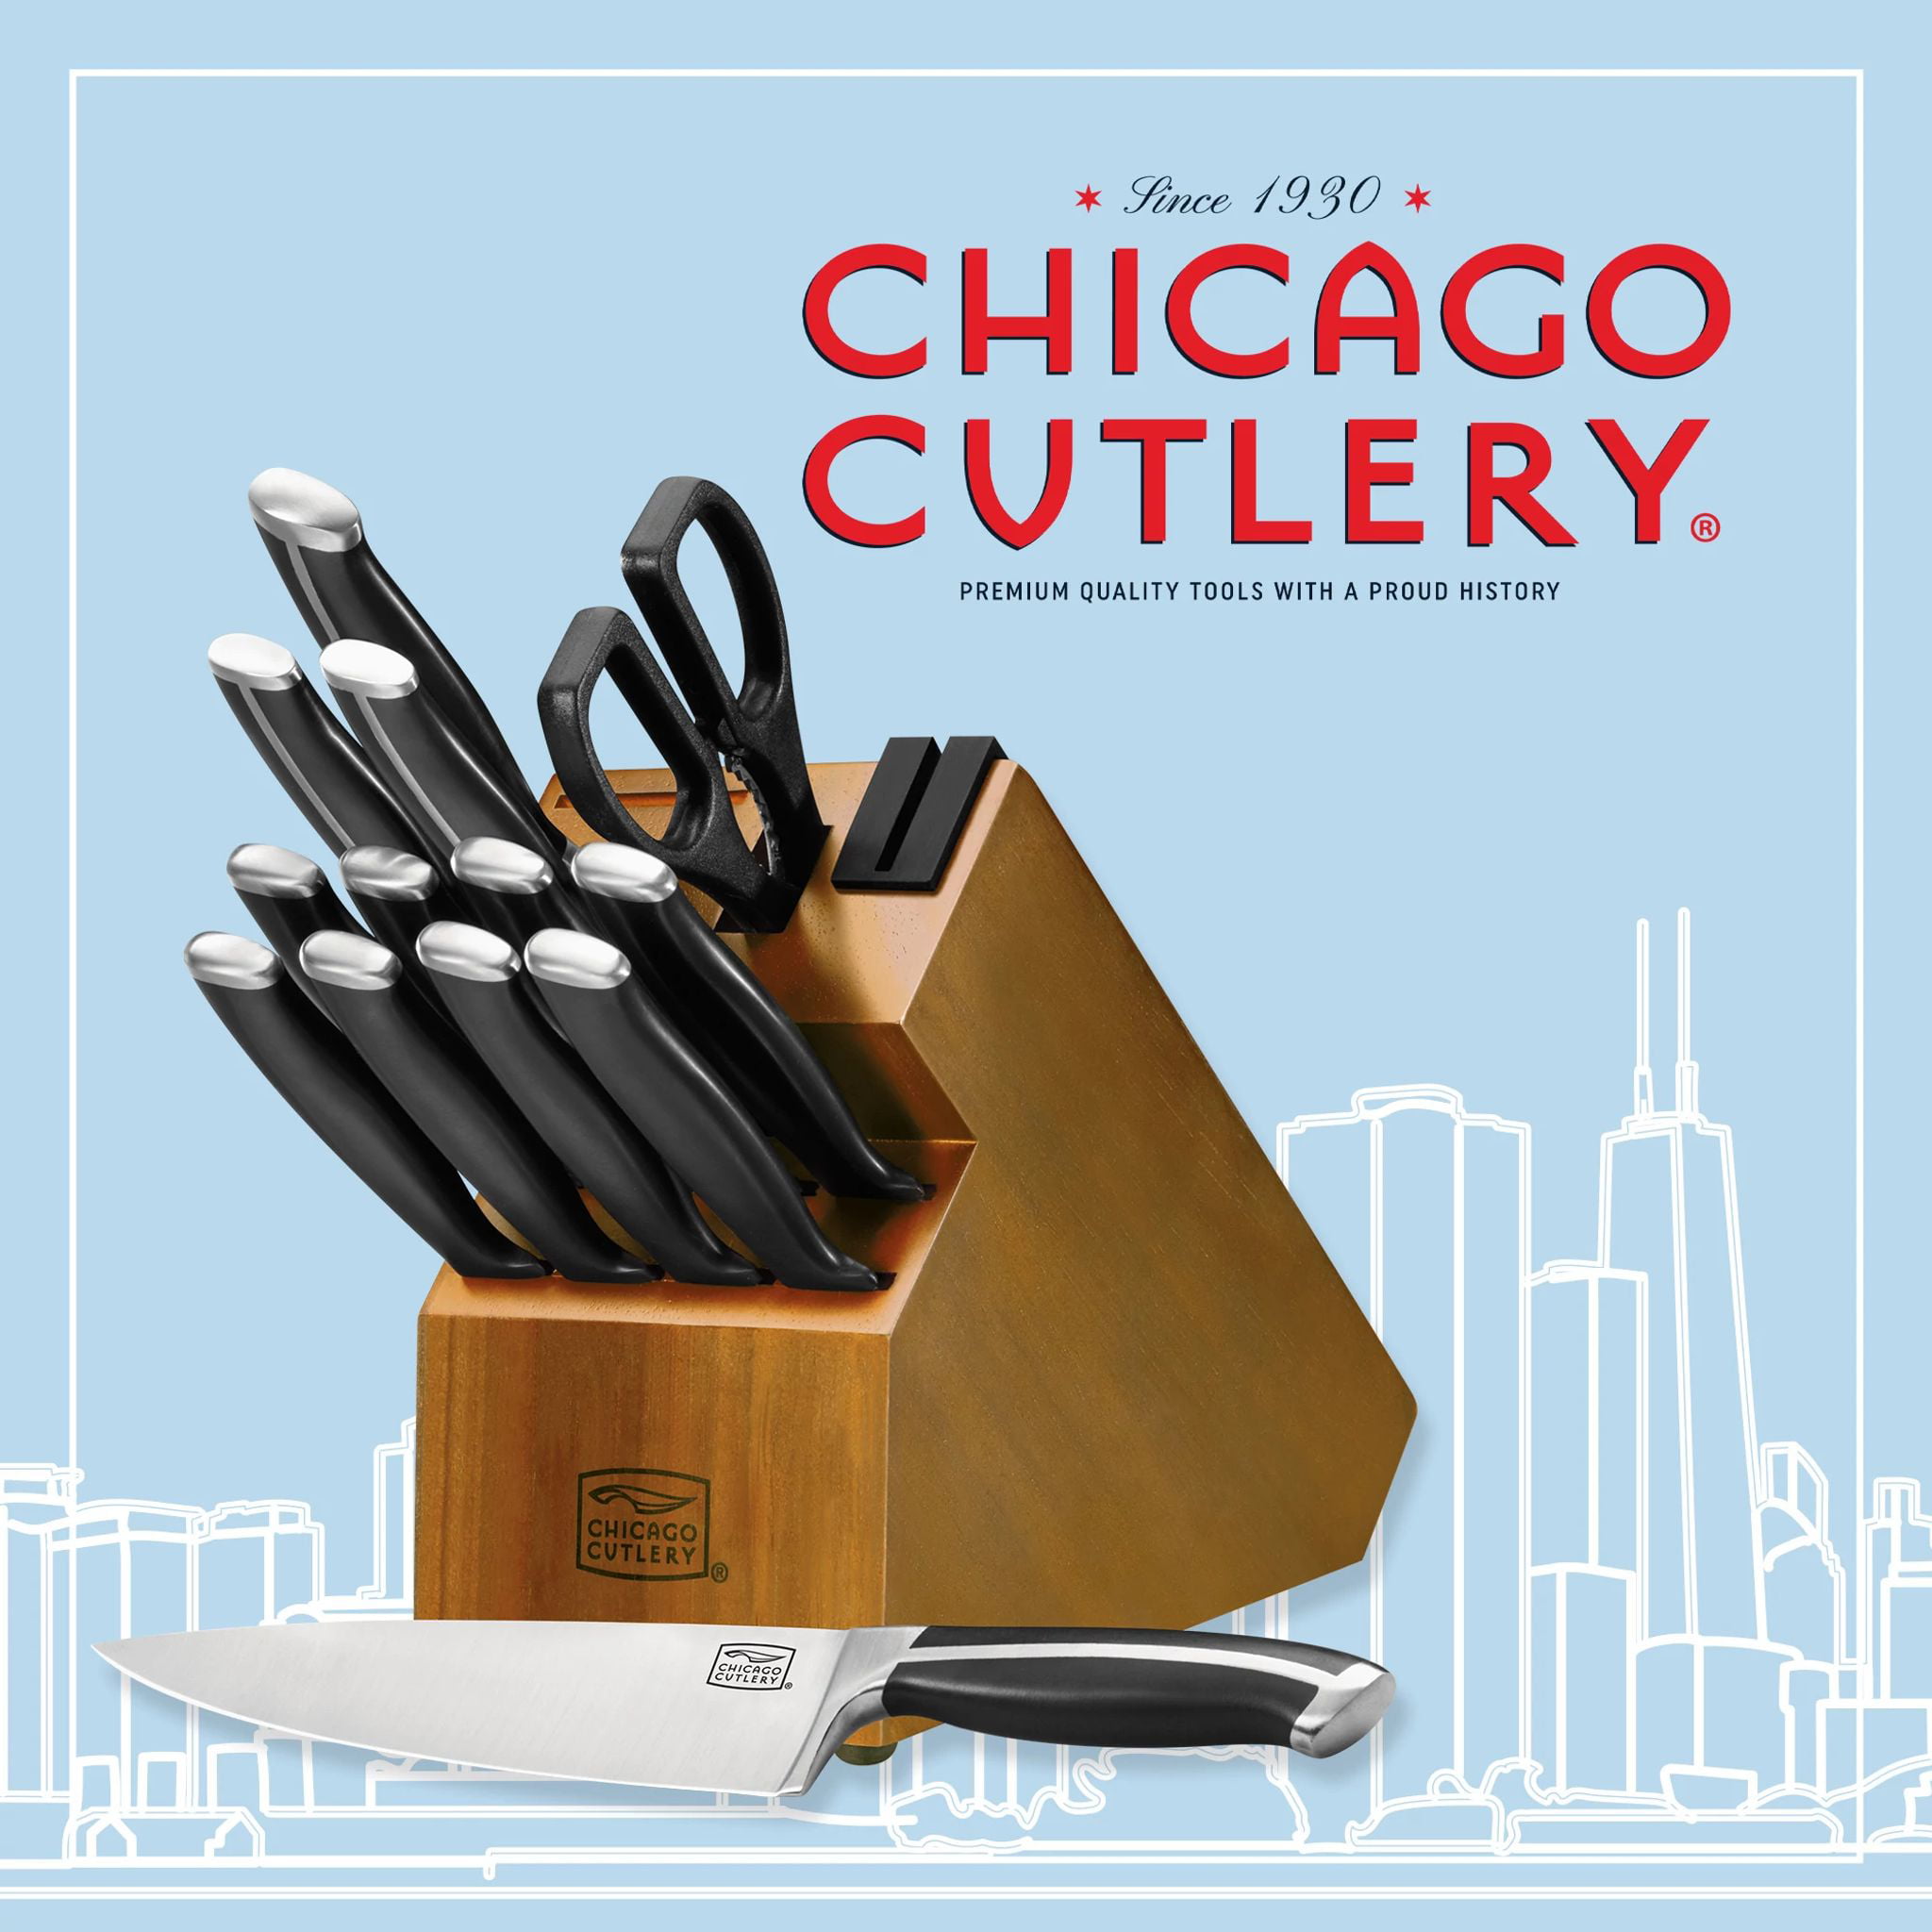 Chicago Cutlery Halsted 7 Pc. Modular Block Set, Multicolor